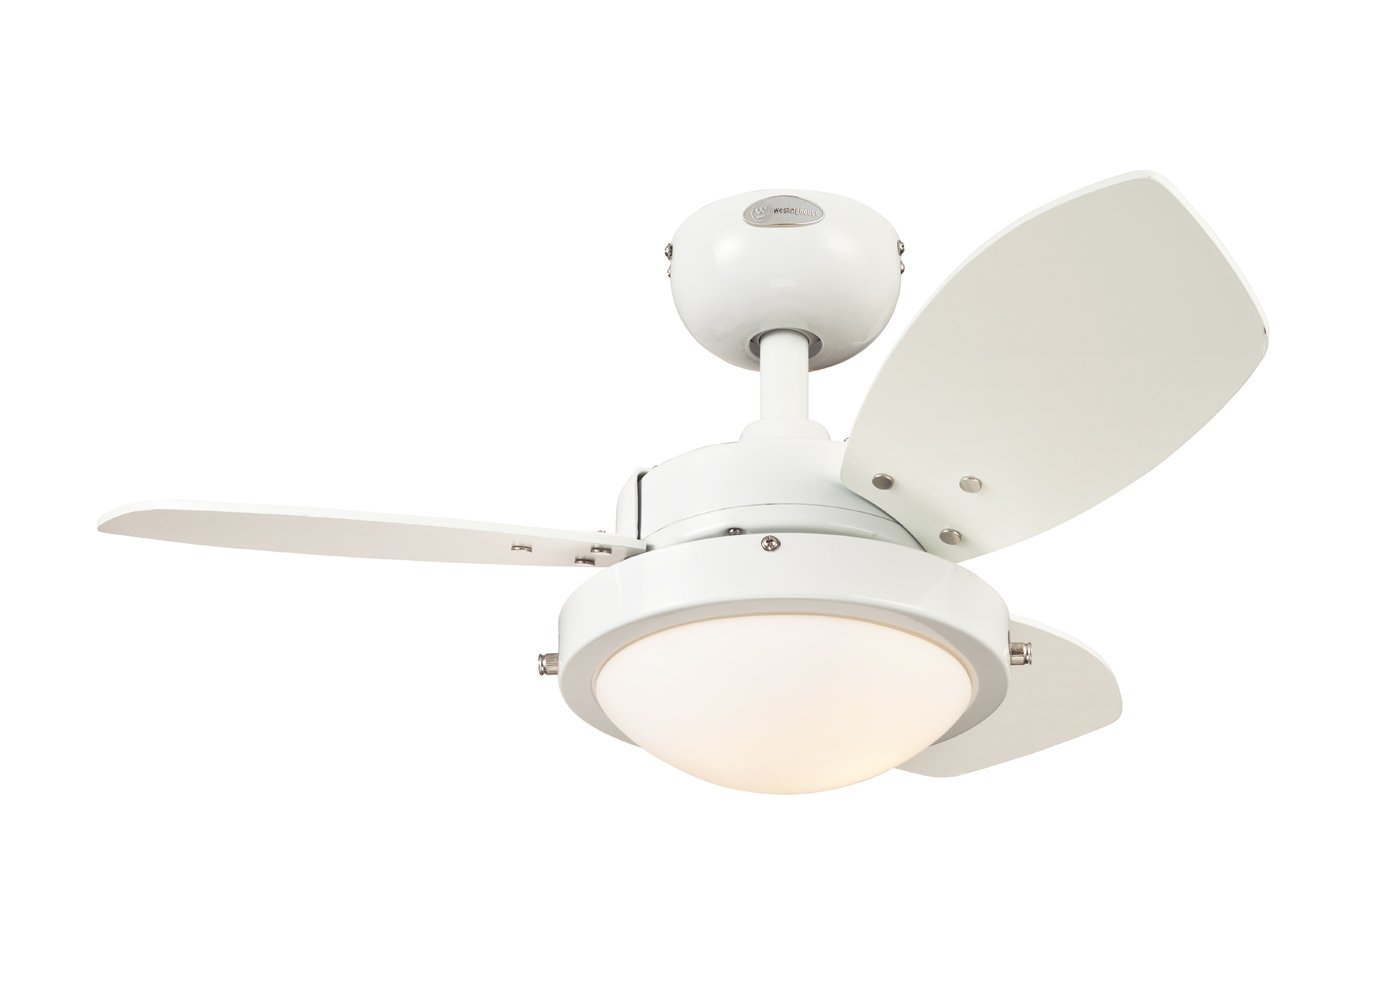 Westinghouse 7247200 Wengue Two-Light Reversible Three-Blade Indoor Ceiling Fan, 30-Inch, White Finish with Opal Frosted Glass